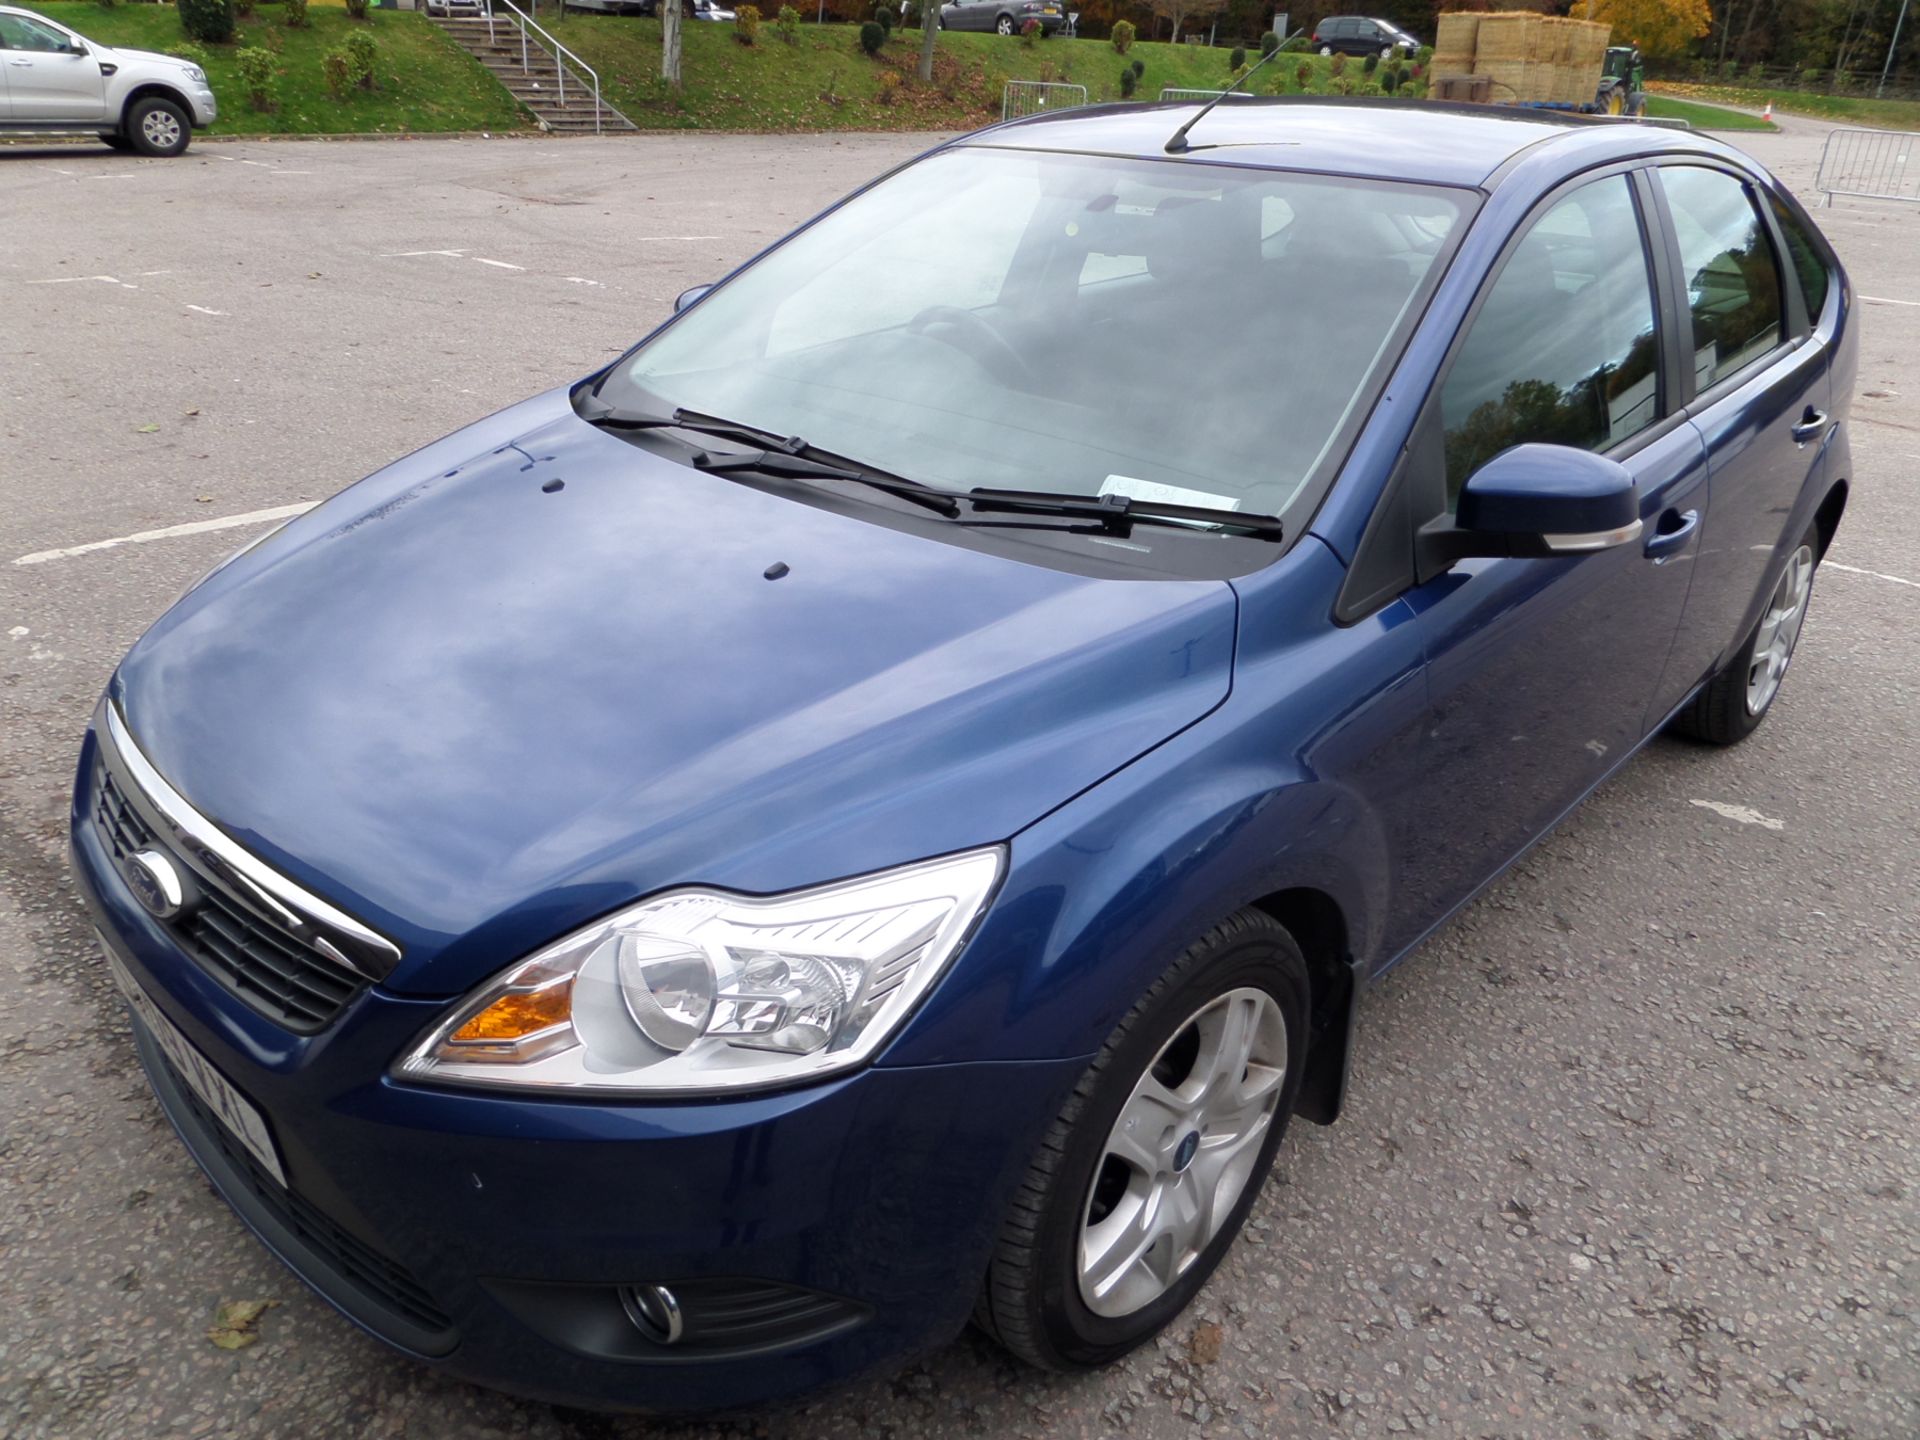 Ford Focus Style Td 115 - 1753cc 5 Door - Image 2 of 11